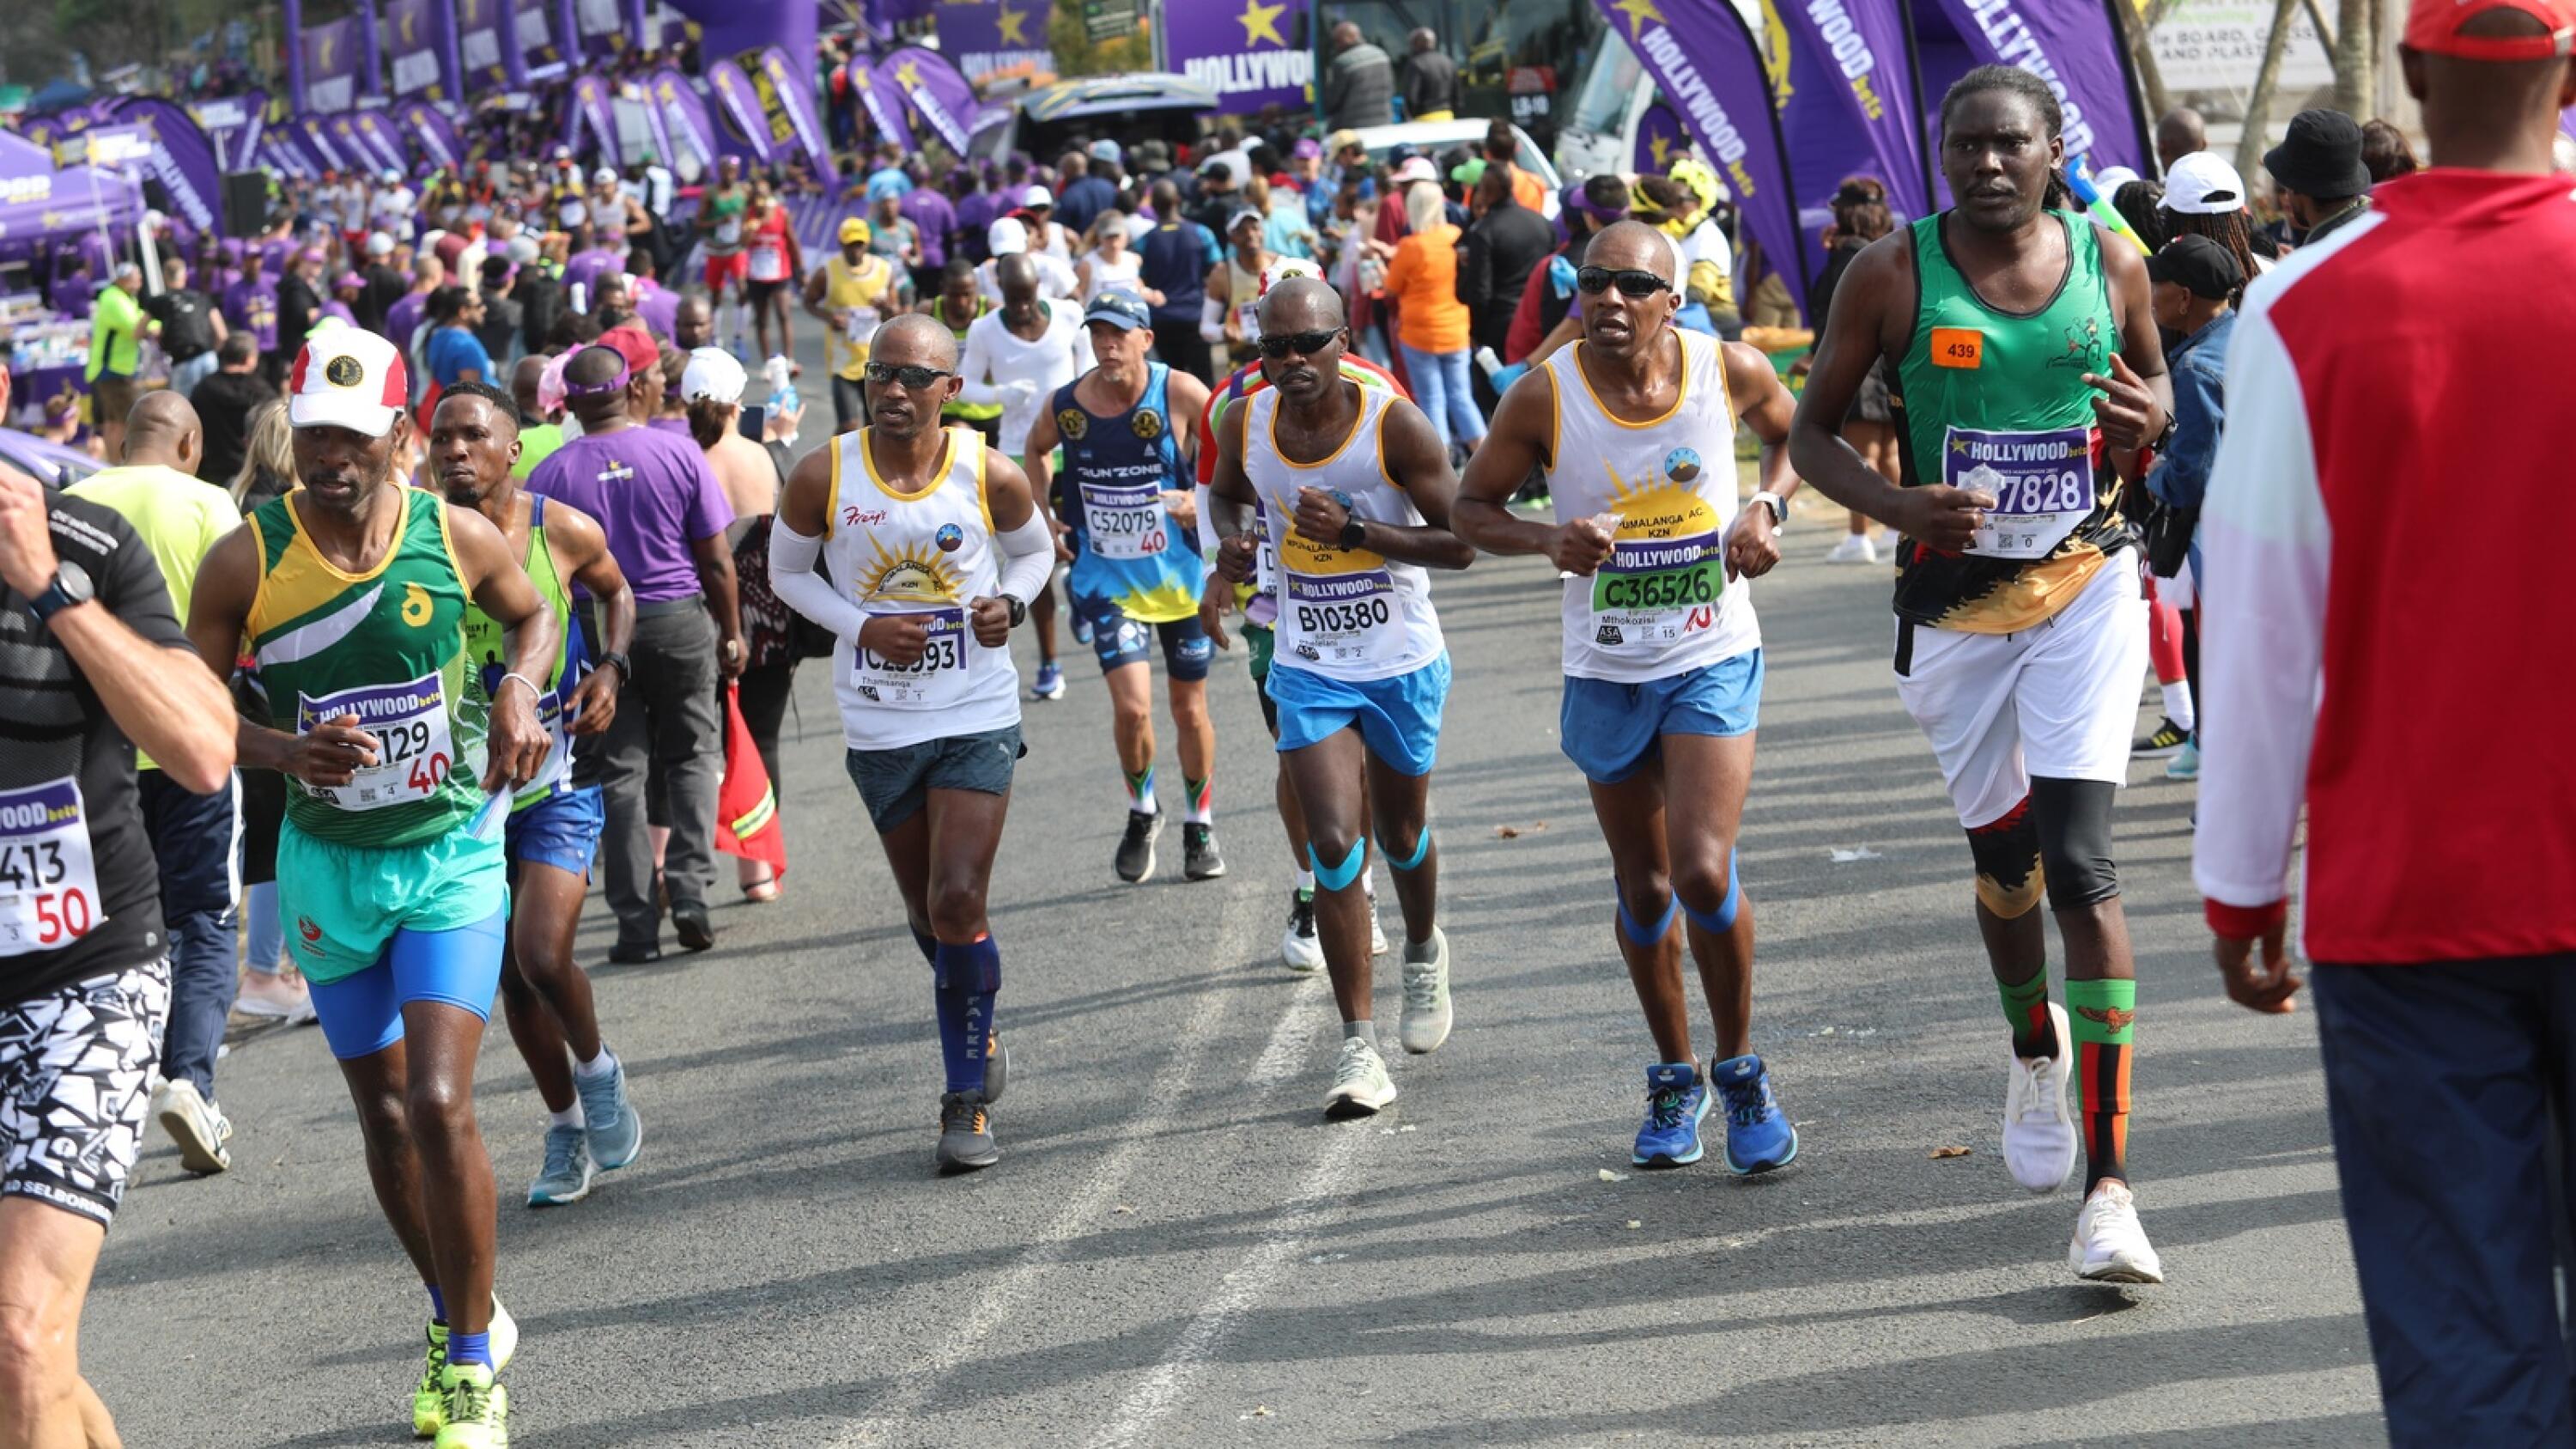 A large group of people running on a road during a marathon.